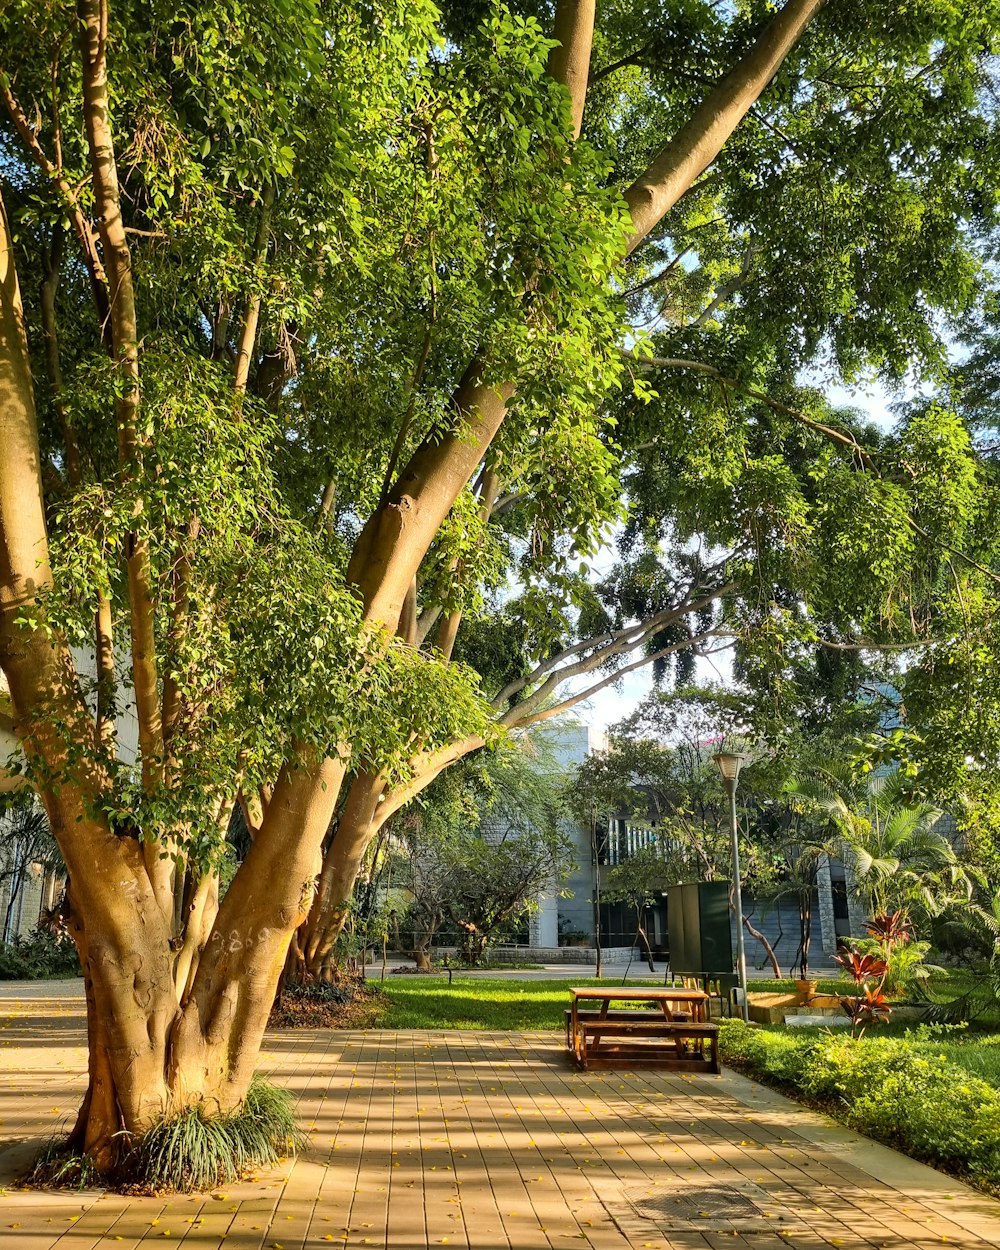 a park area with a bench and trees